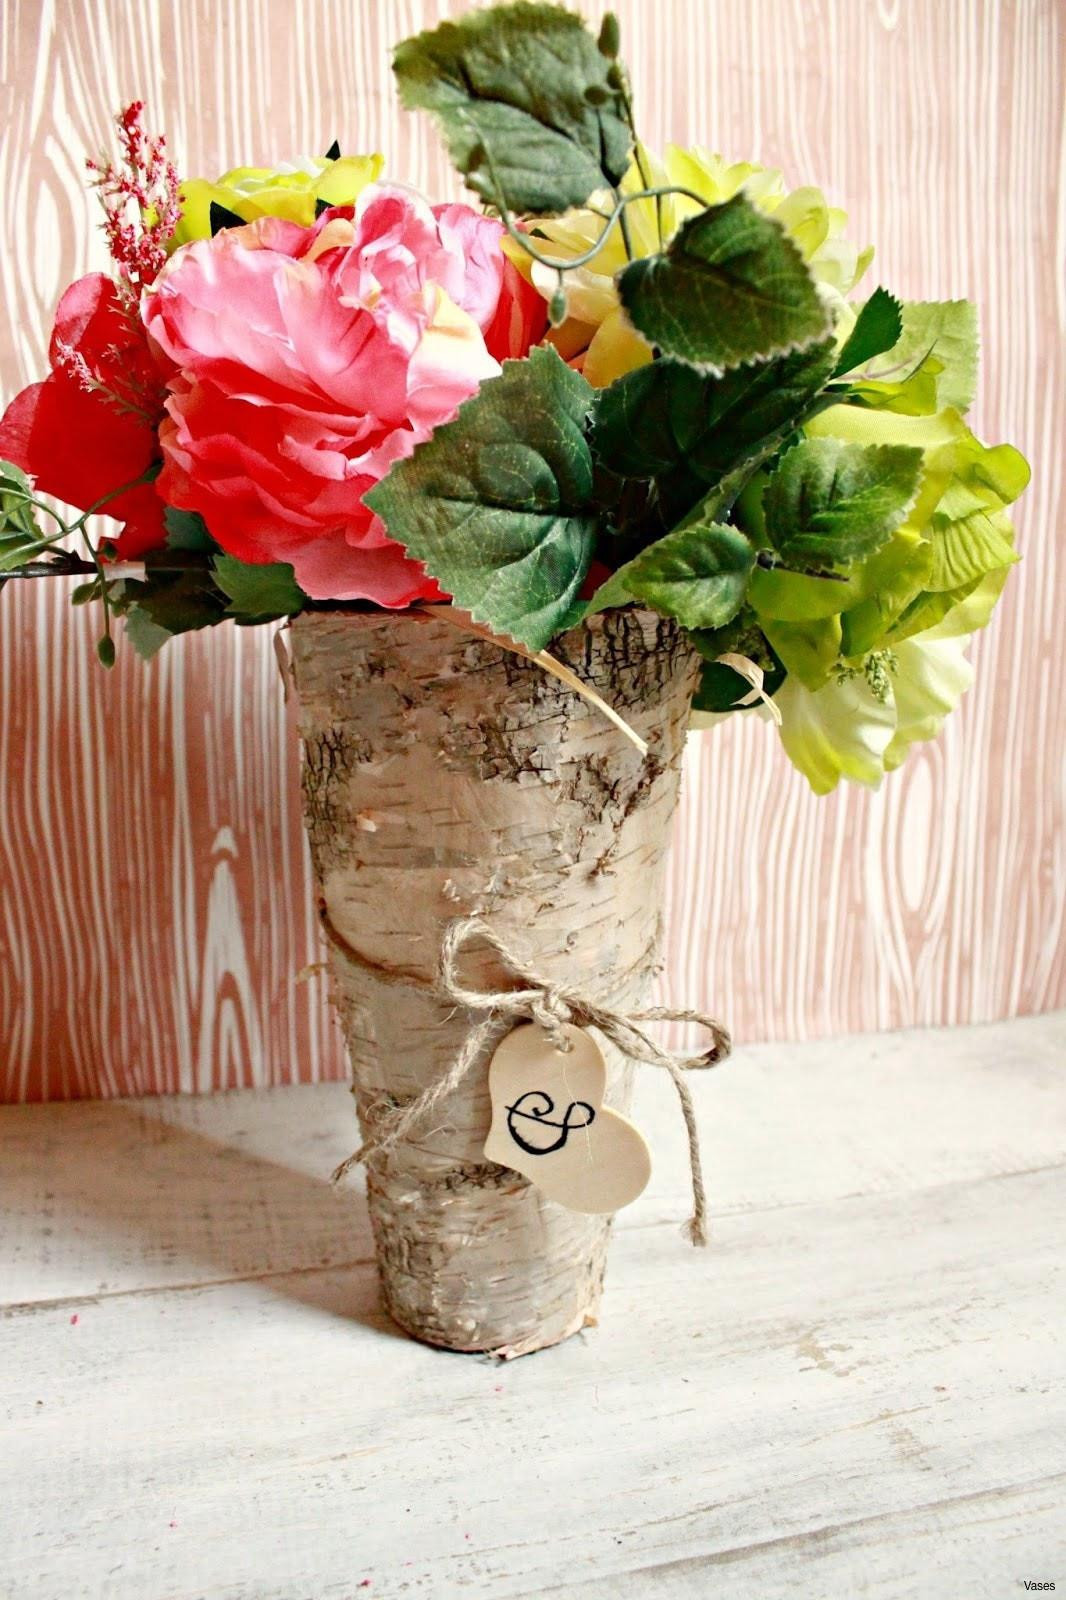 18 Perfect Vase with Red Roses 2024 free download vase with red roses of diy wedding ideas on a budget fresh flowers and decorations for in diy wedding ideas on a budget fresh flowers and decorations for weddings h vases diy wood